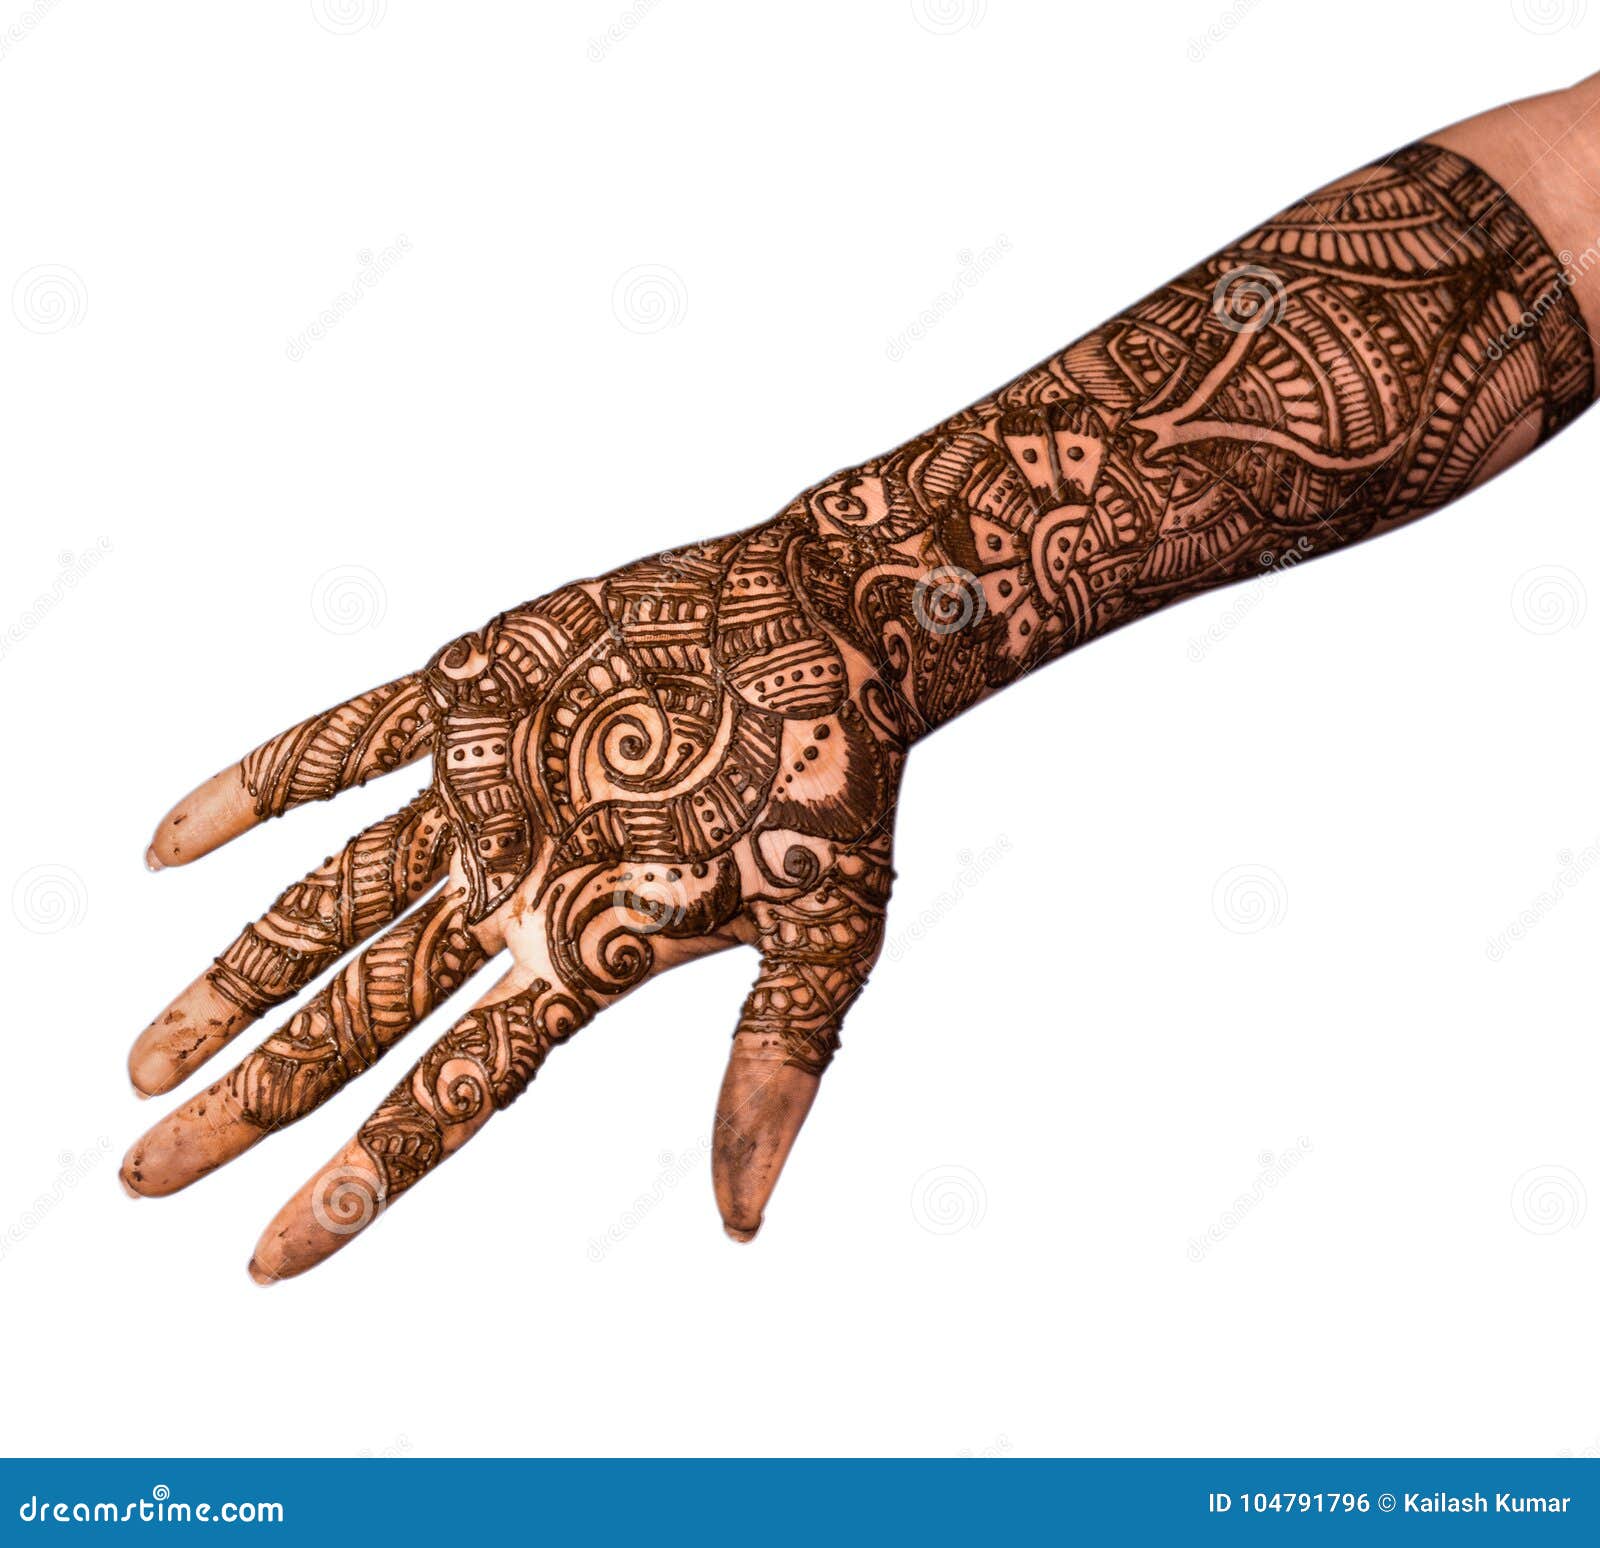 Mehandi Design stock photo. Image of asian, floral, culture ...